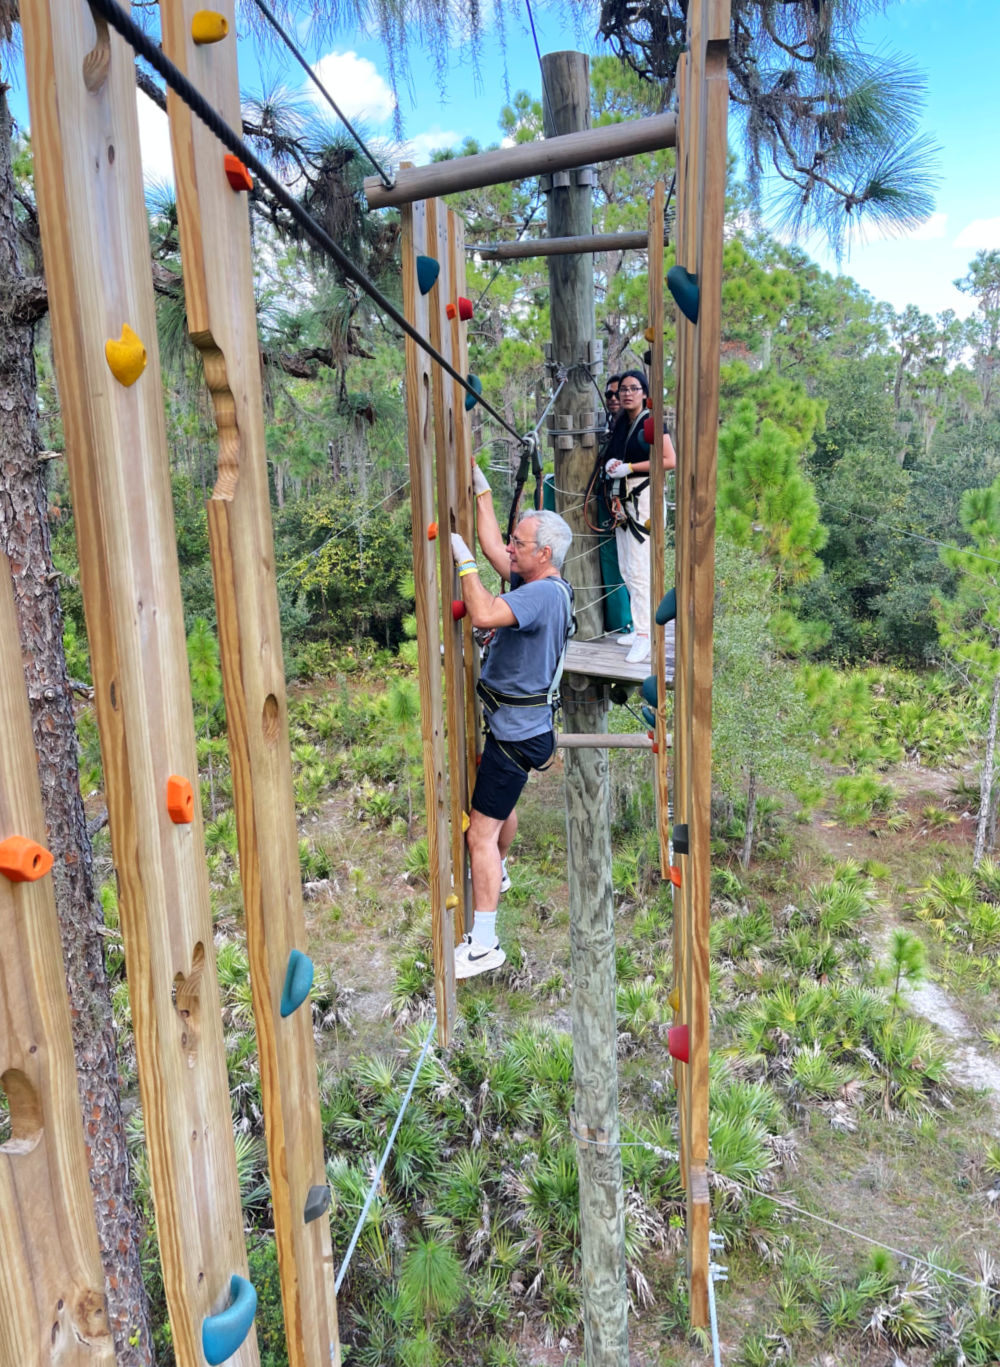 If you're wondering whether an adventure course can be enjoyed in midlife and beyond, the answer is yes!